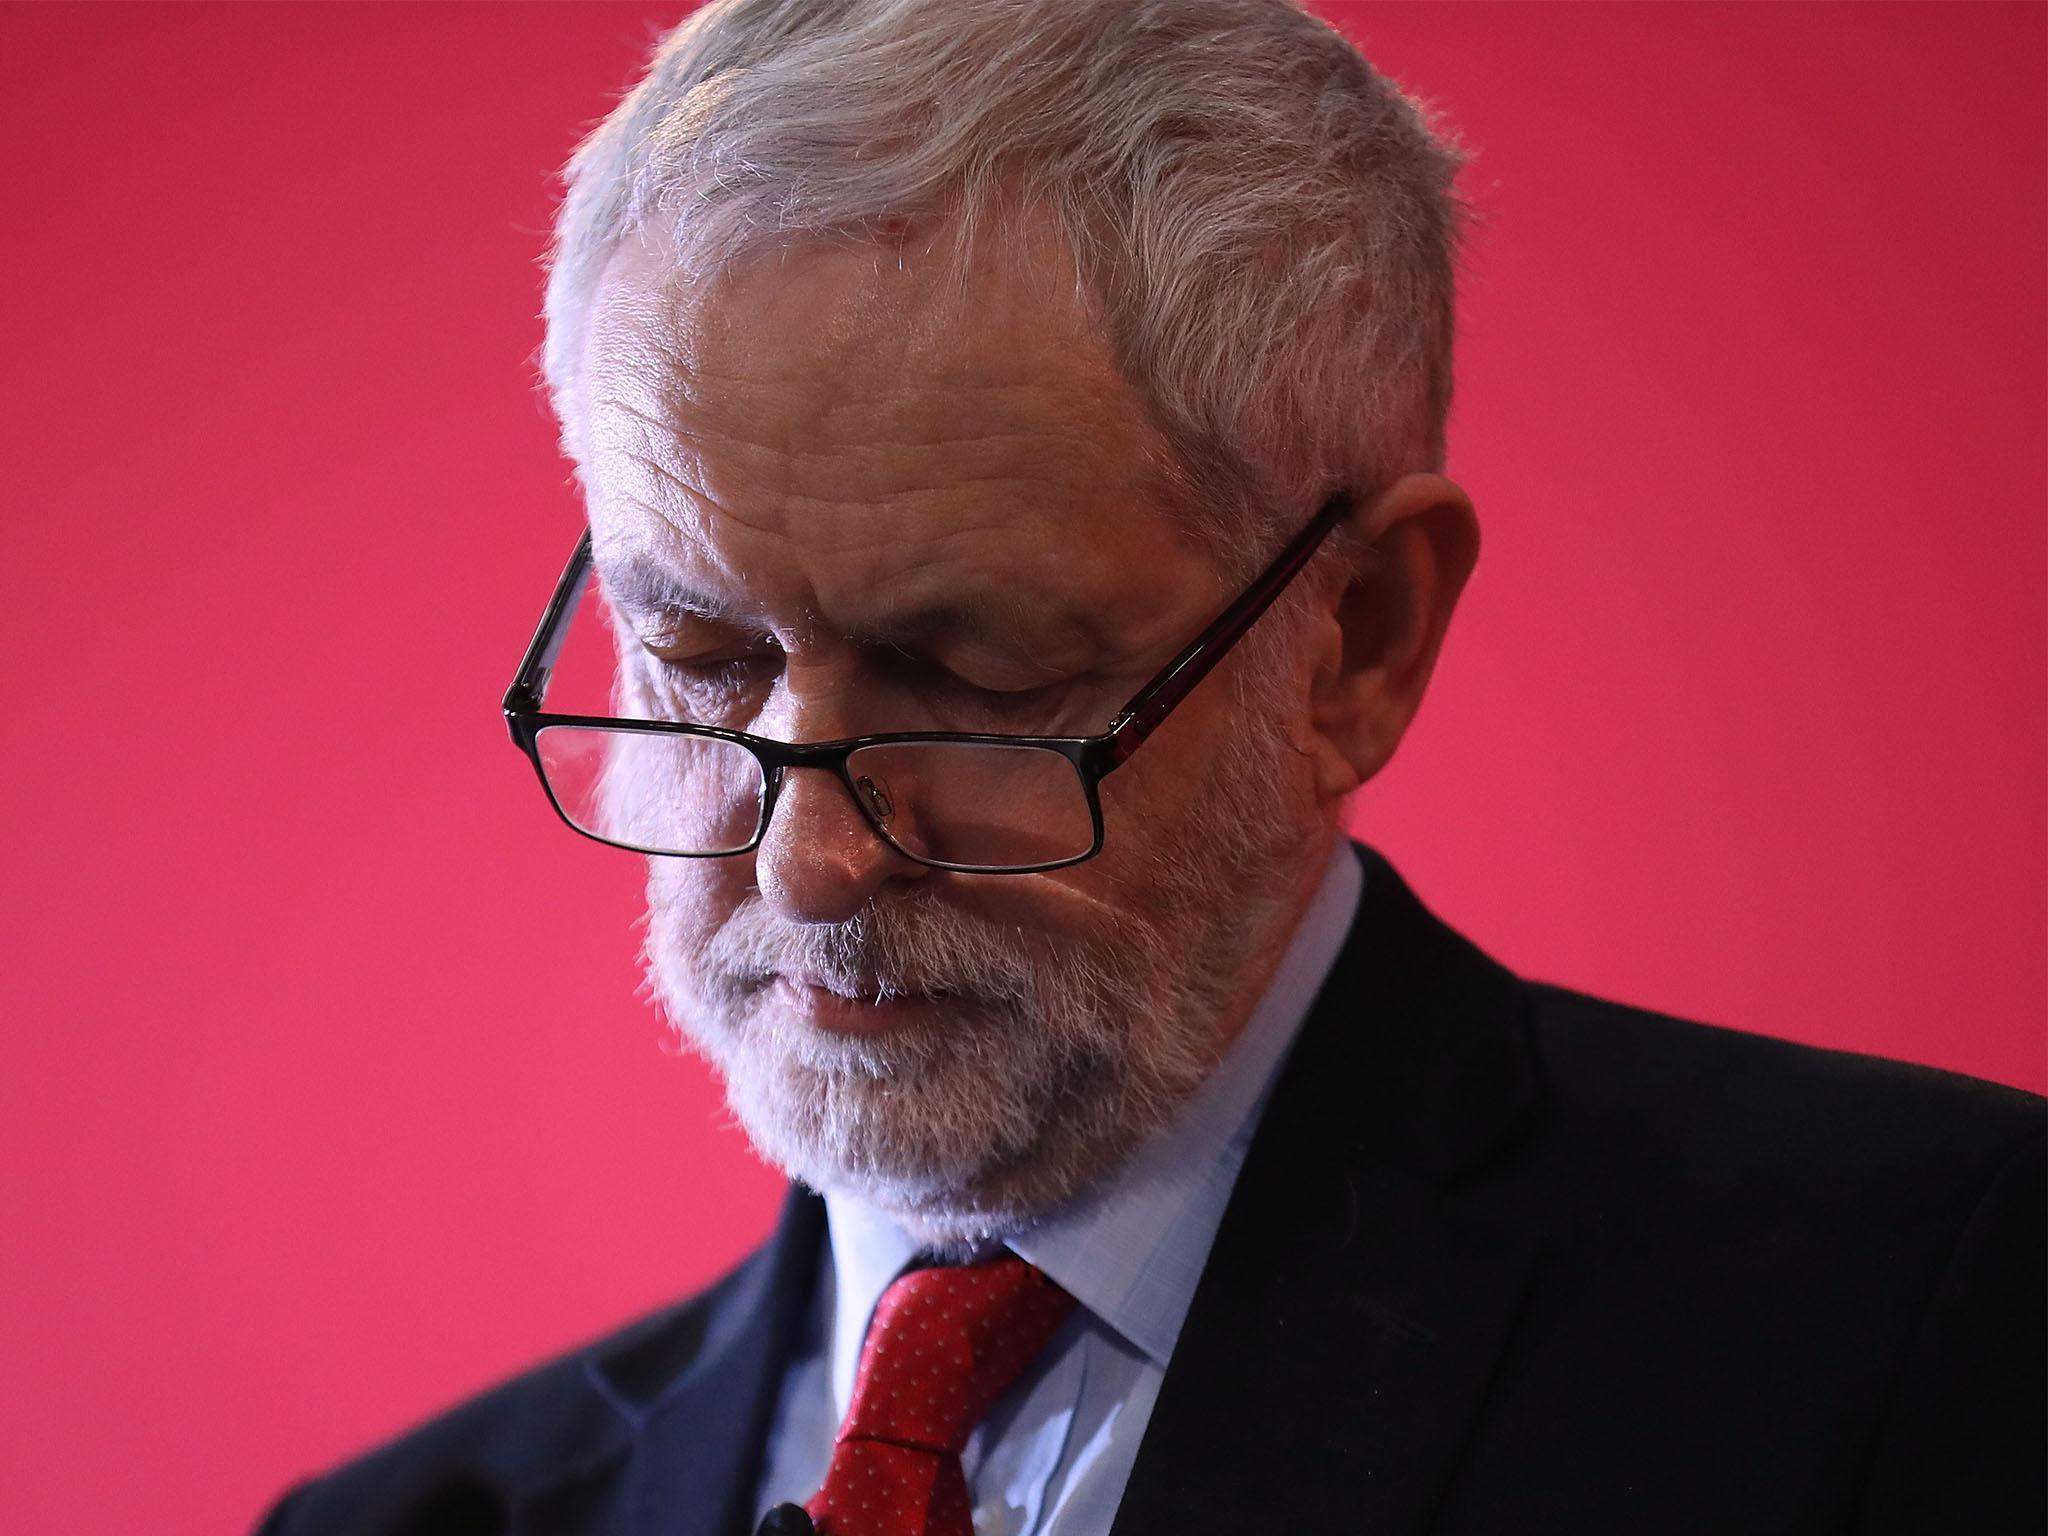 'We are not tolerating antisemitism in any form in the Labour Party', the Labour leader says